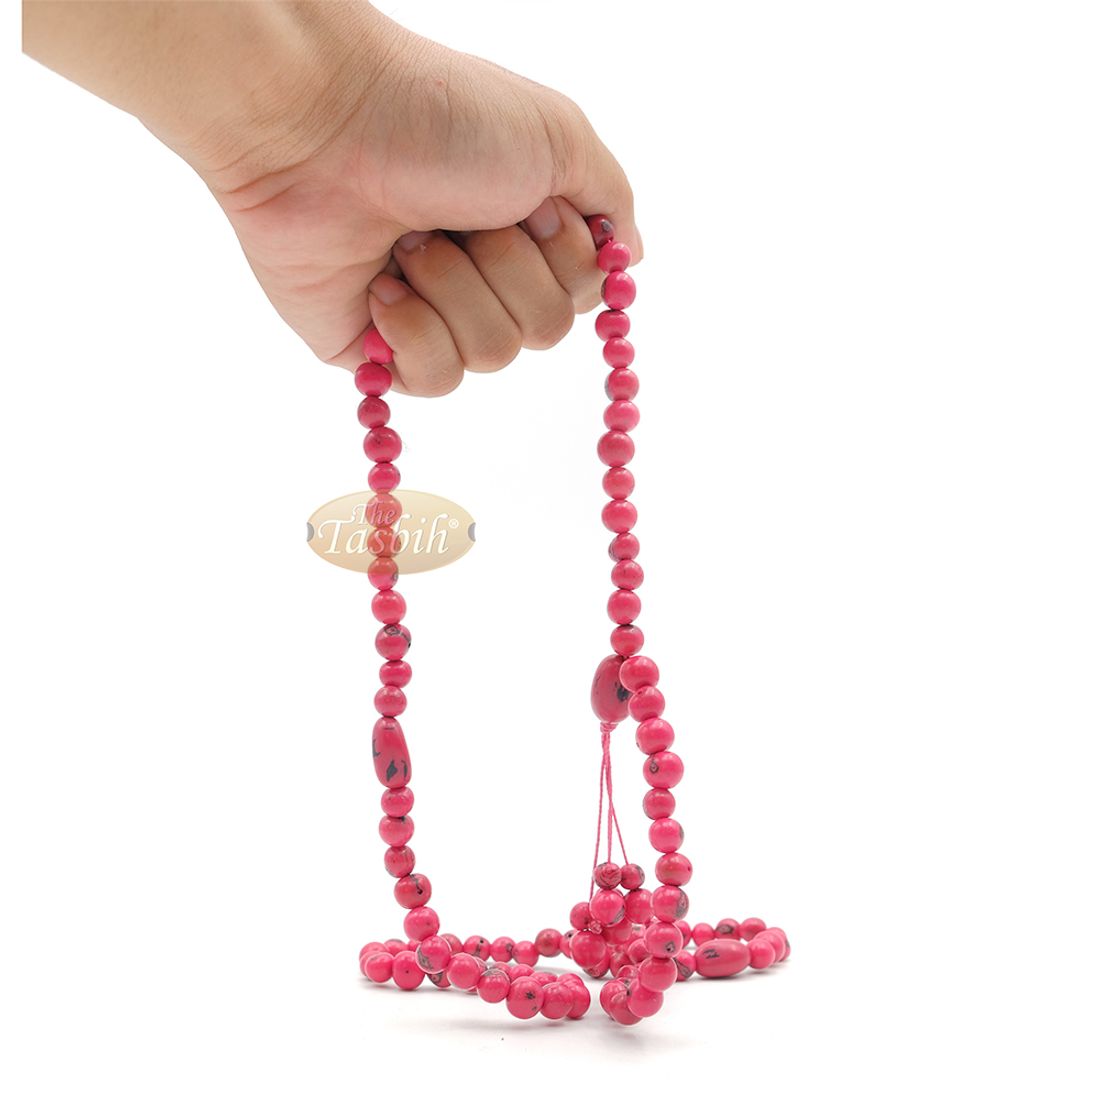 Pink Colored Natural Dye Eco-friendly Sustainable Original Açai Seed 9mm Beads Traditional Tasbih